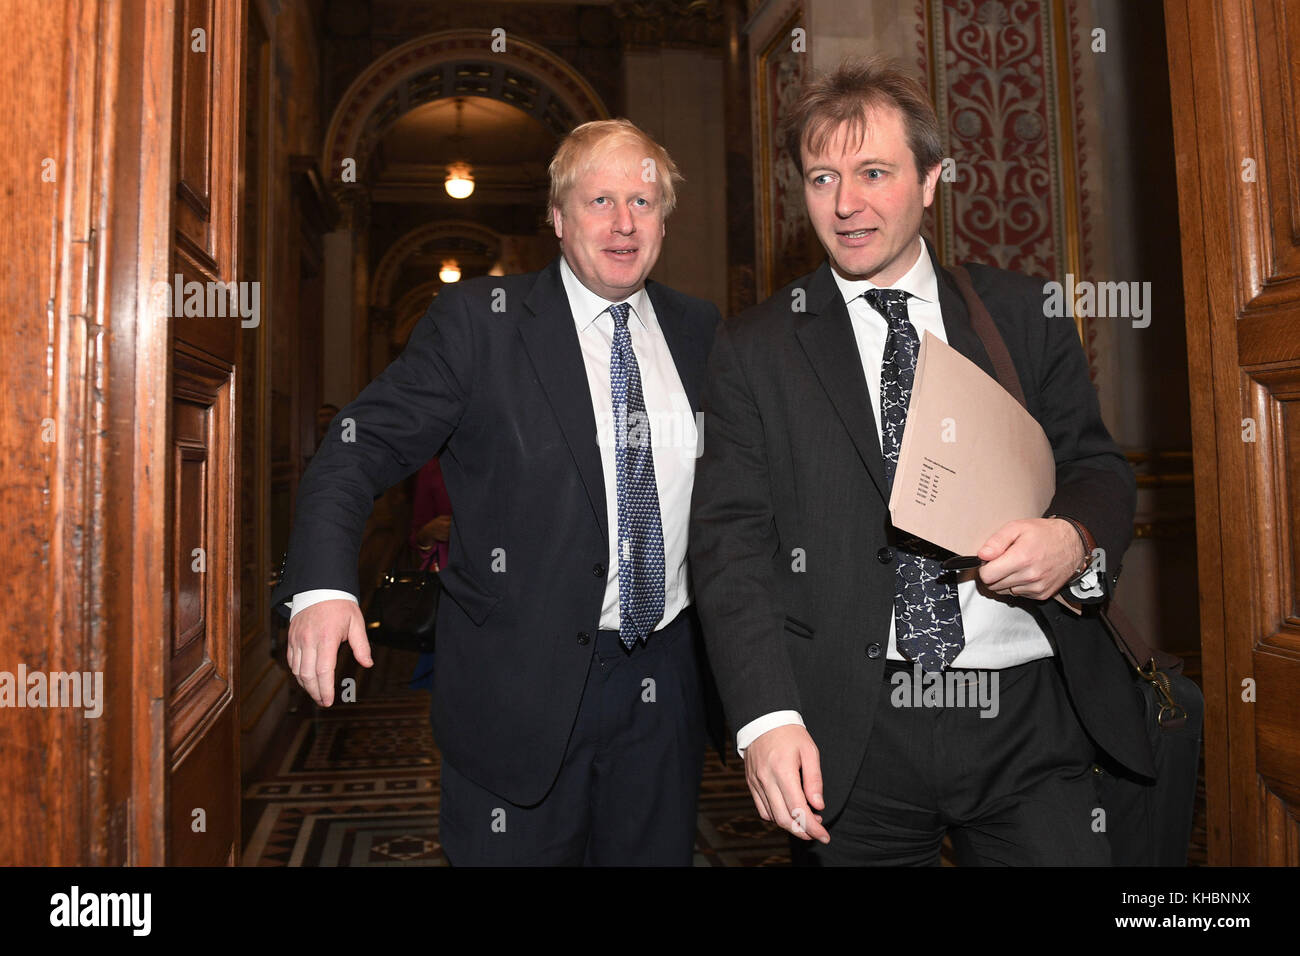 Foreign Secretary Boris Johnson meets with Richard Ratcliffe, the husband of Nazanin Zaghari Ratcliffe who is detained in Iran, at the Foreign & Commonwealth Office in London. Stock Photo